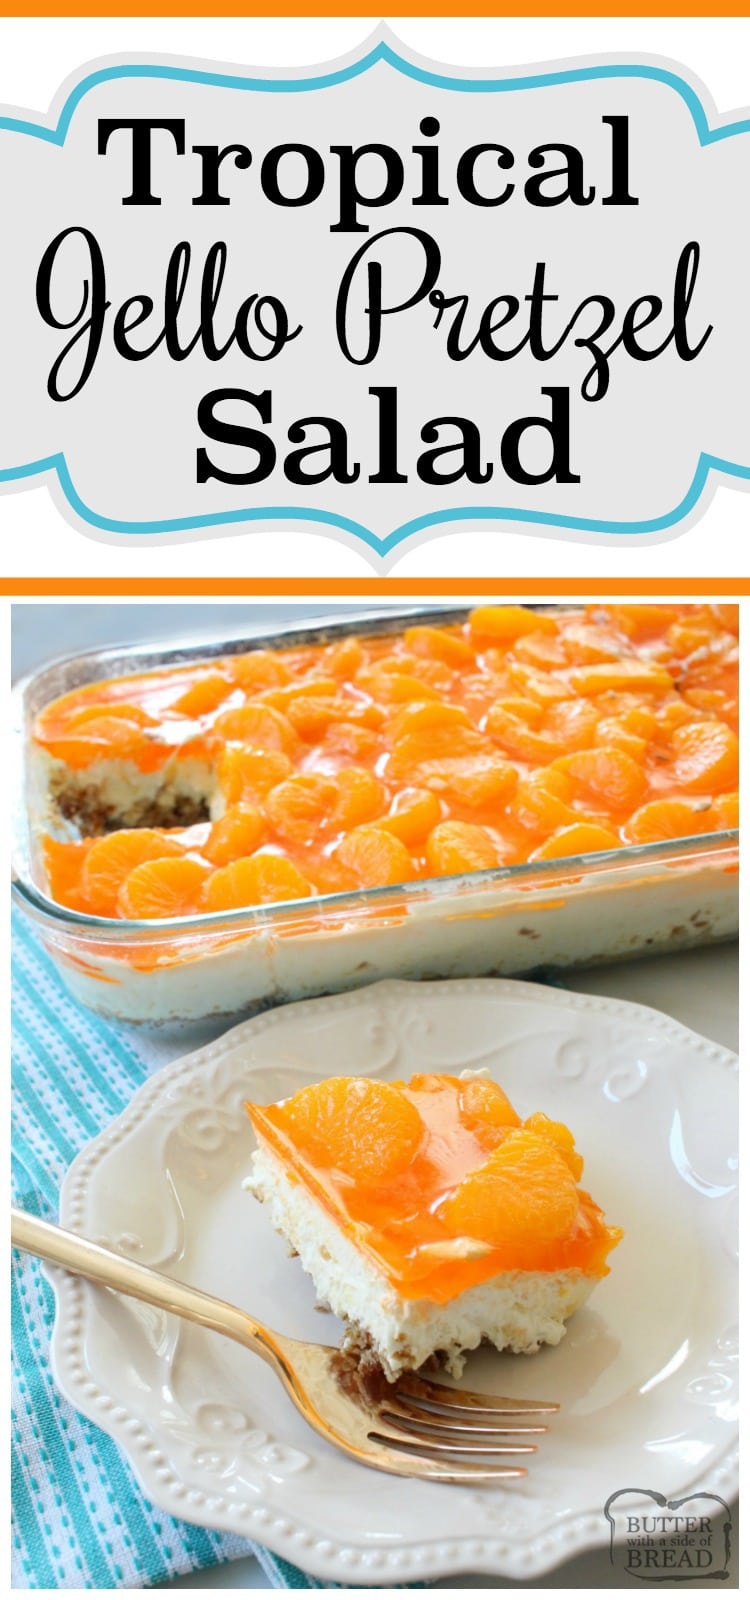 Tropical Jello Pretzel Salad is a combination of orange, pineapple and coconut flavors all in an easy-to-make sweet salad recipe! Easy #jello #salad recipe from Butter With A Side of Bread